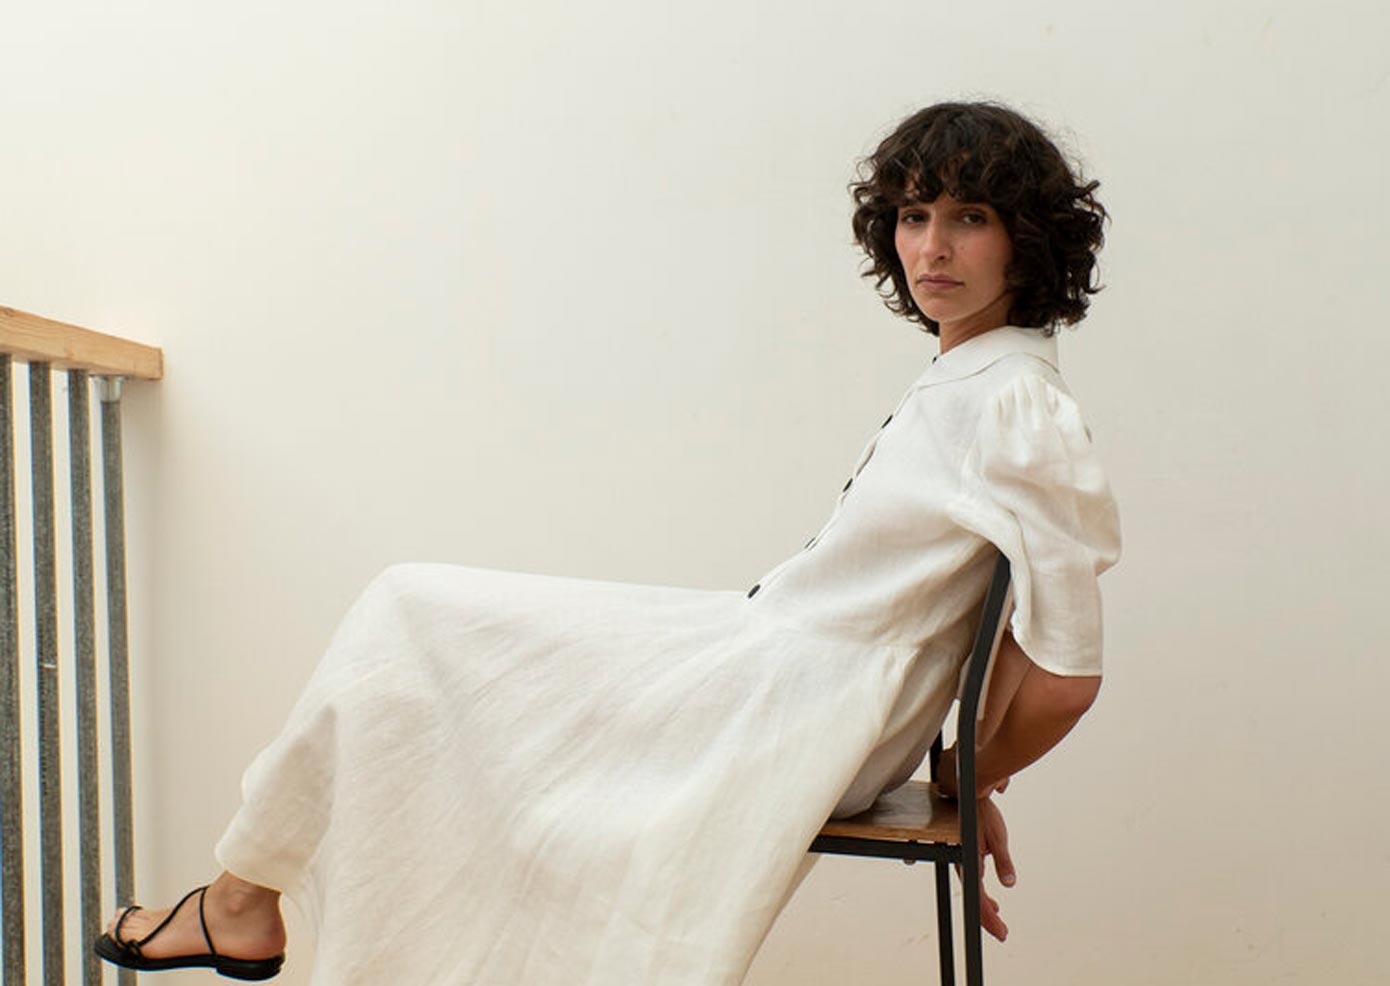 Irish Linen Dresses to Buy Now and Love Forever - The Gloss Magazine